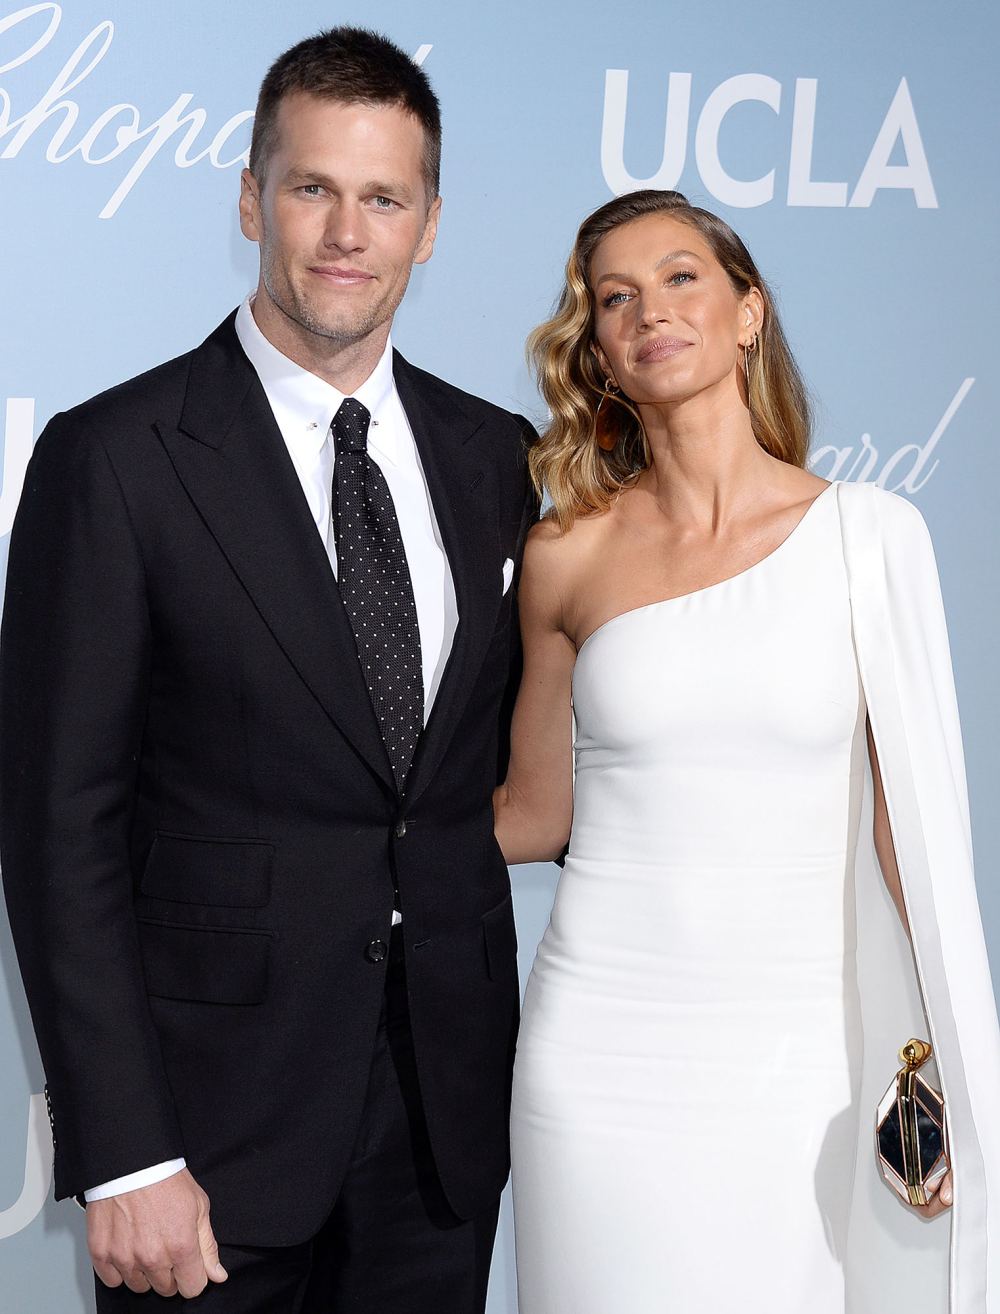 Gisele Bundchen Reacts tp Tom Brady and the Tampa Bay Buccaneers Super Bowl 2021